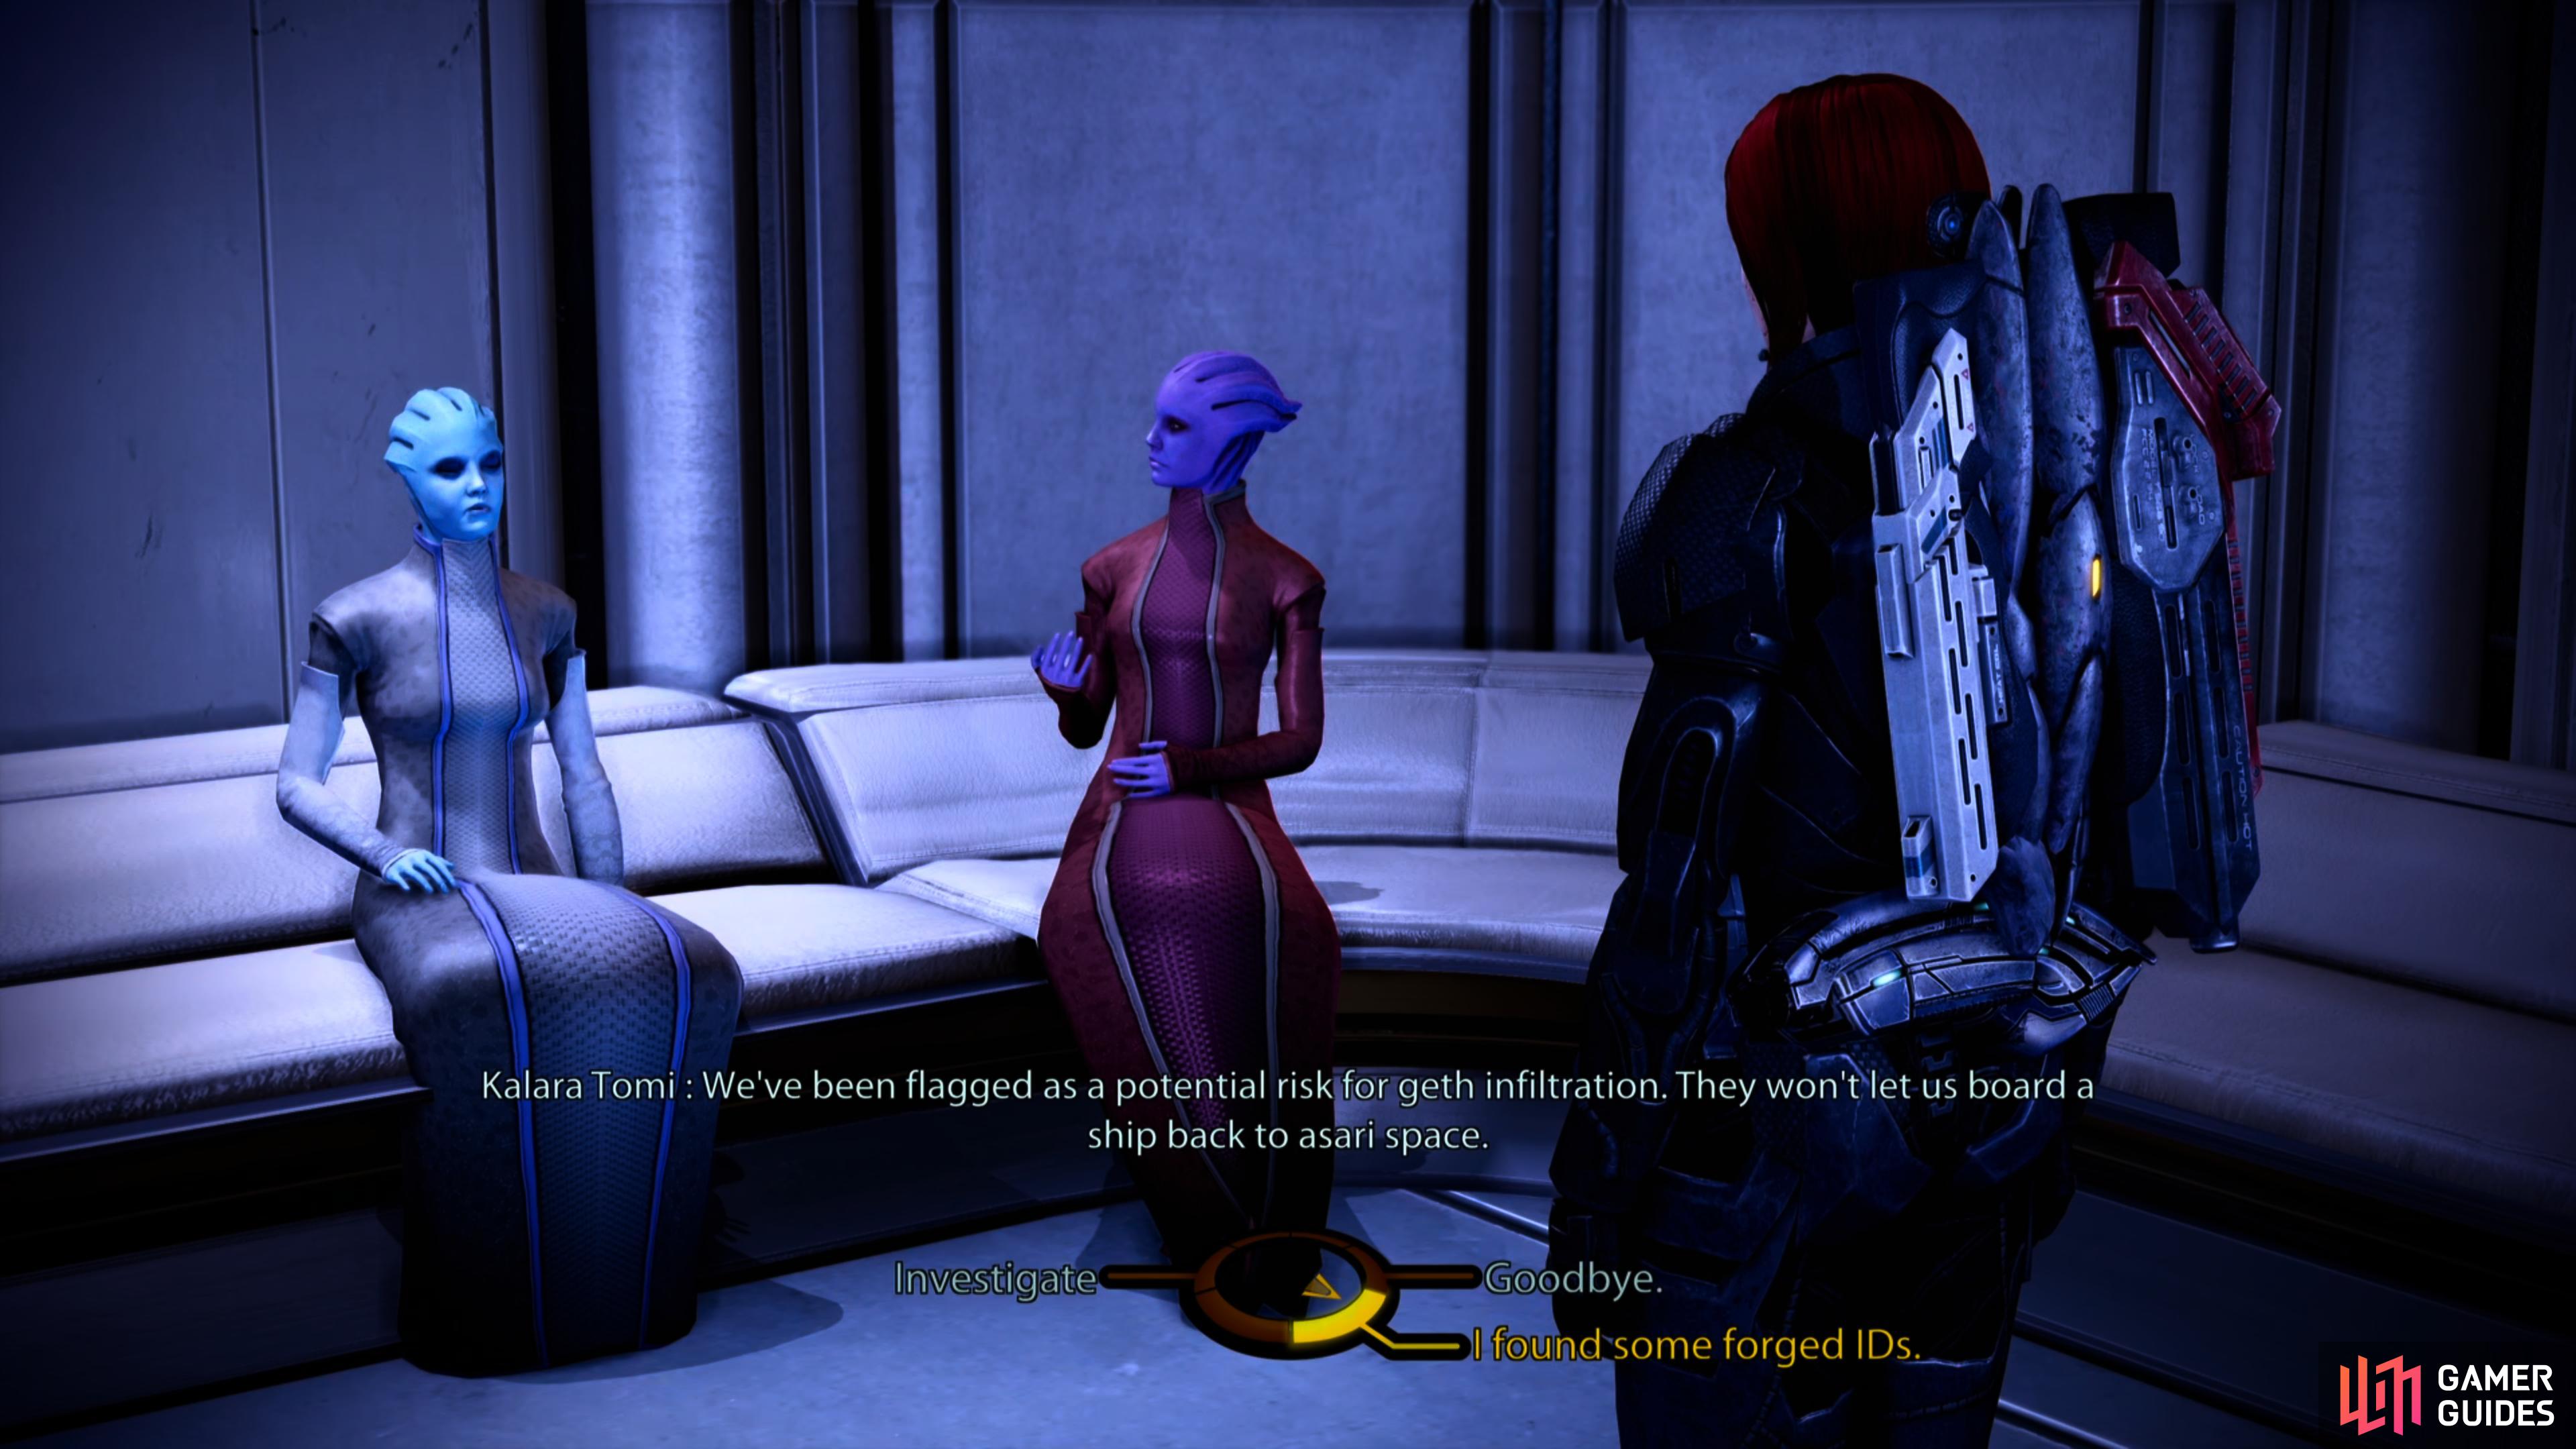 After completing Thane's loyalty mission, you'll find an asari named Kalara fretting over a security issue.